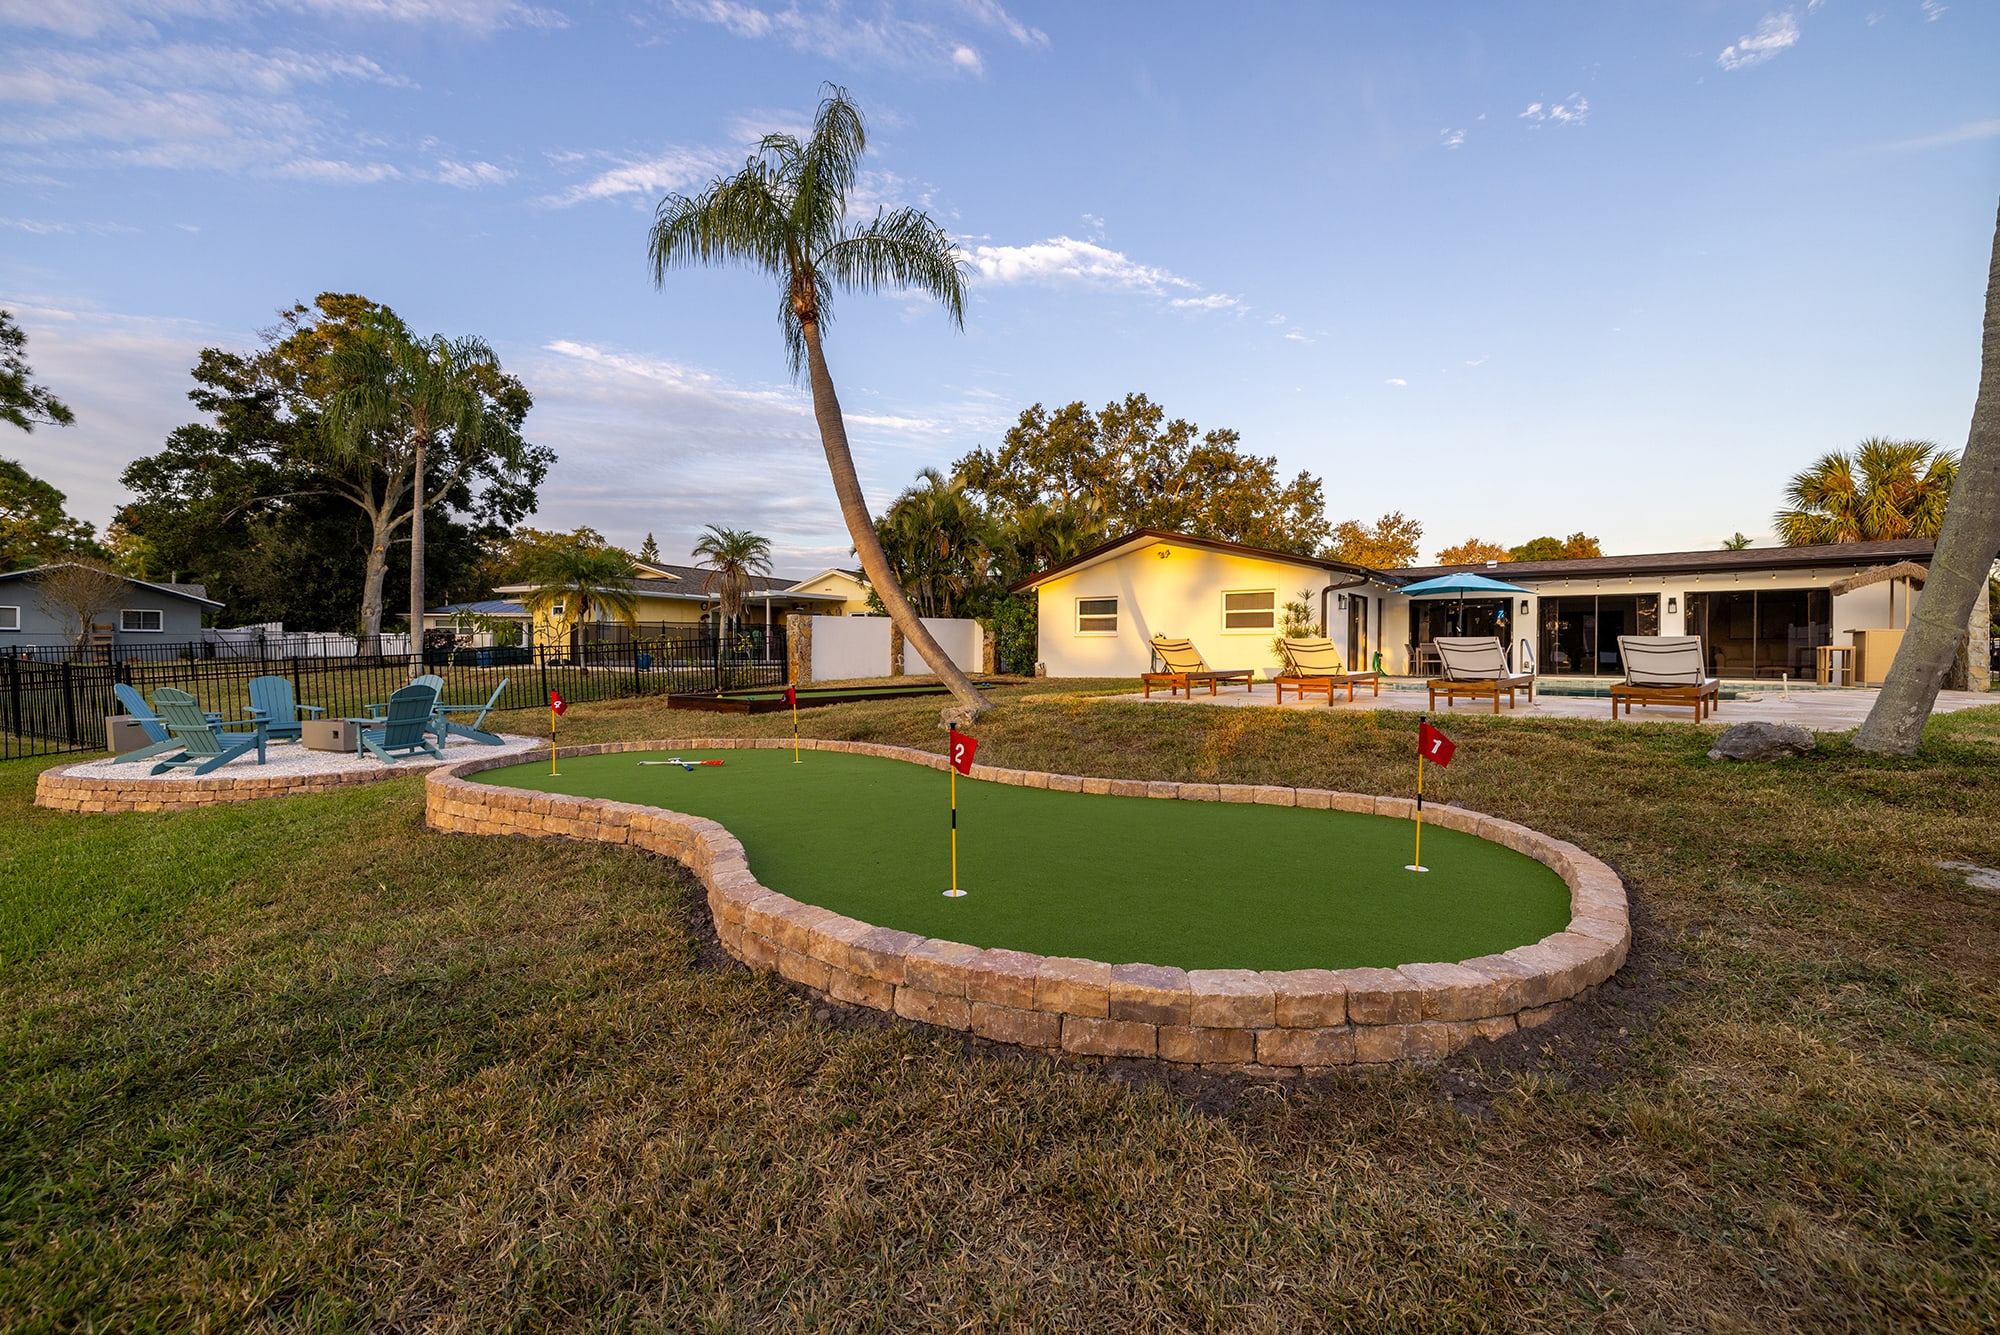 Up for a game of putt putt?